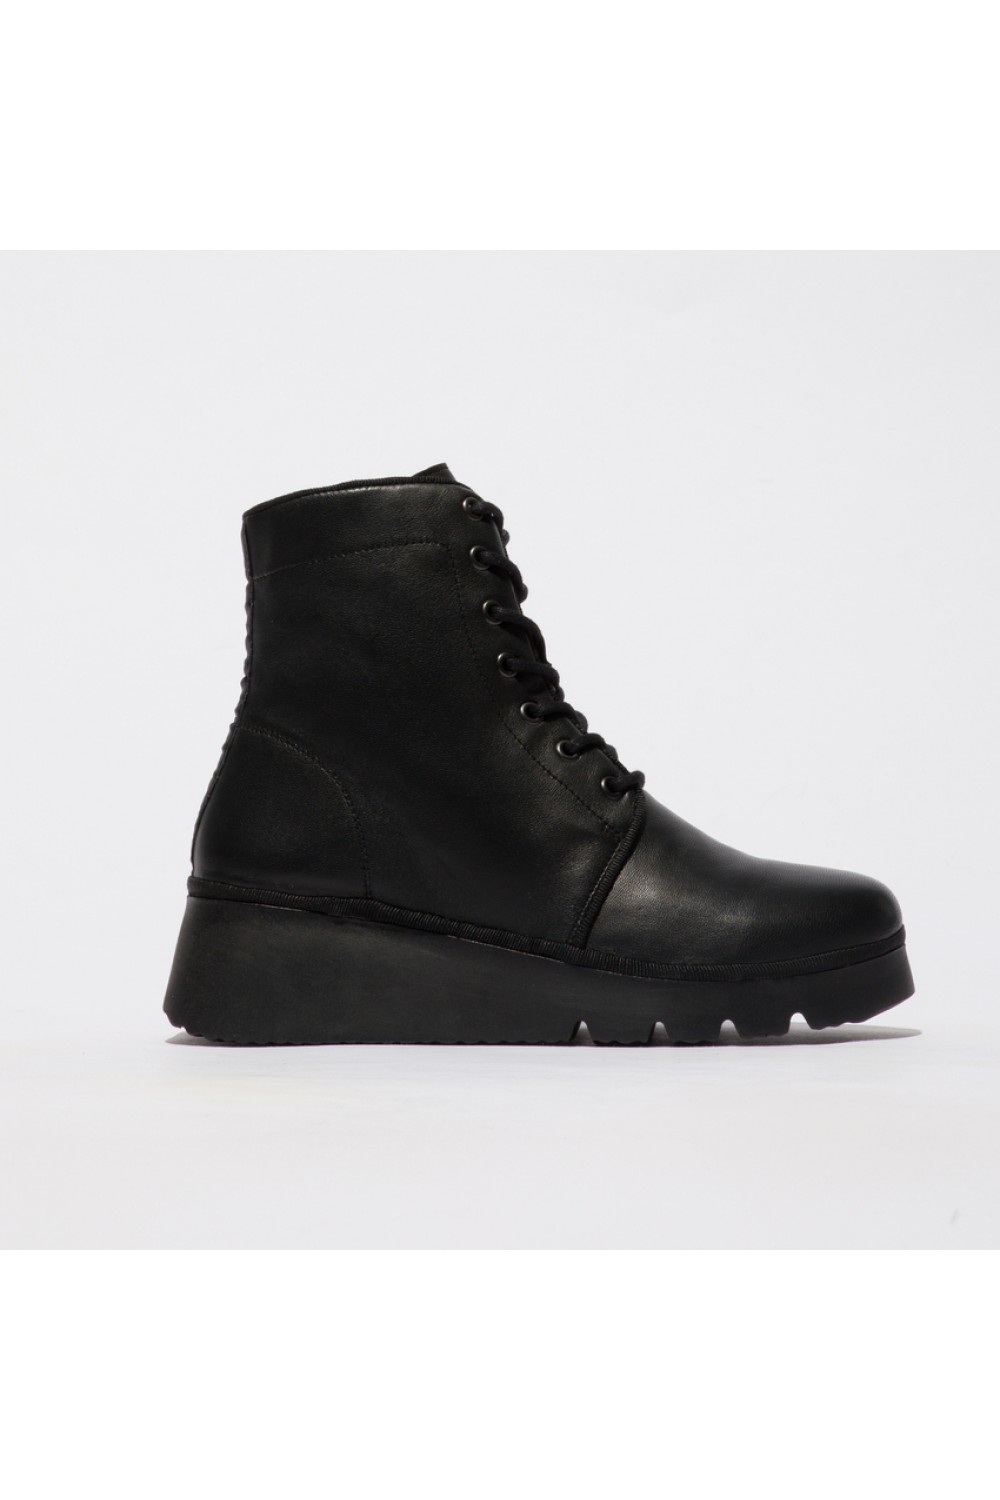 FLY LONDON Pall404 Lace-up Ankle Boots Black